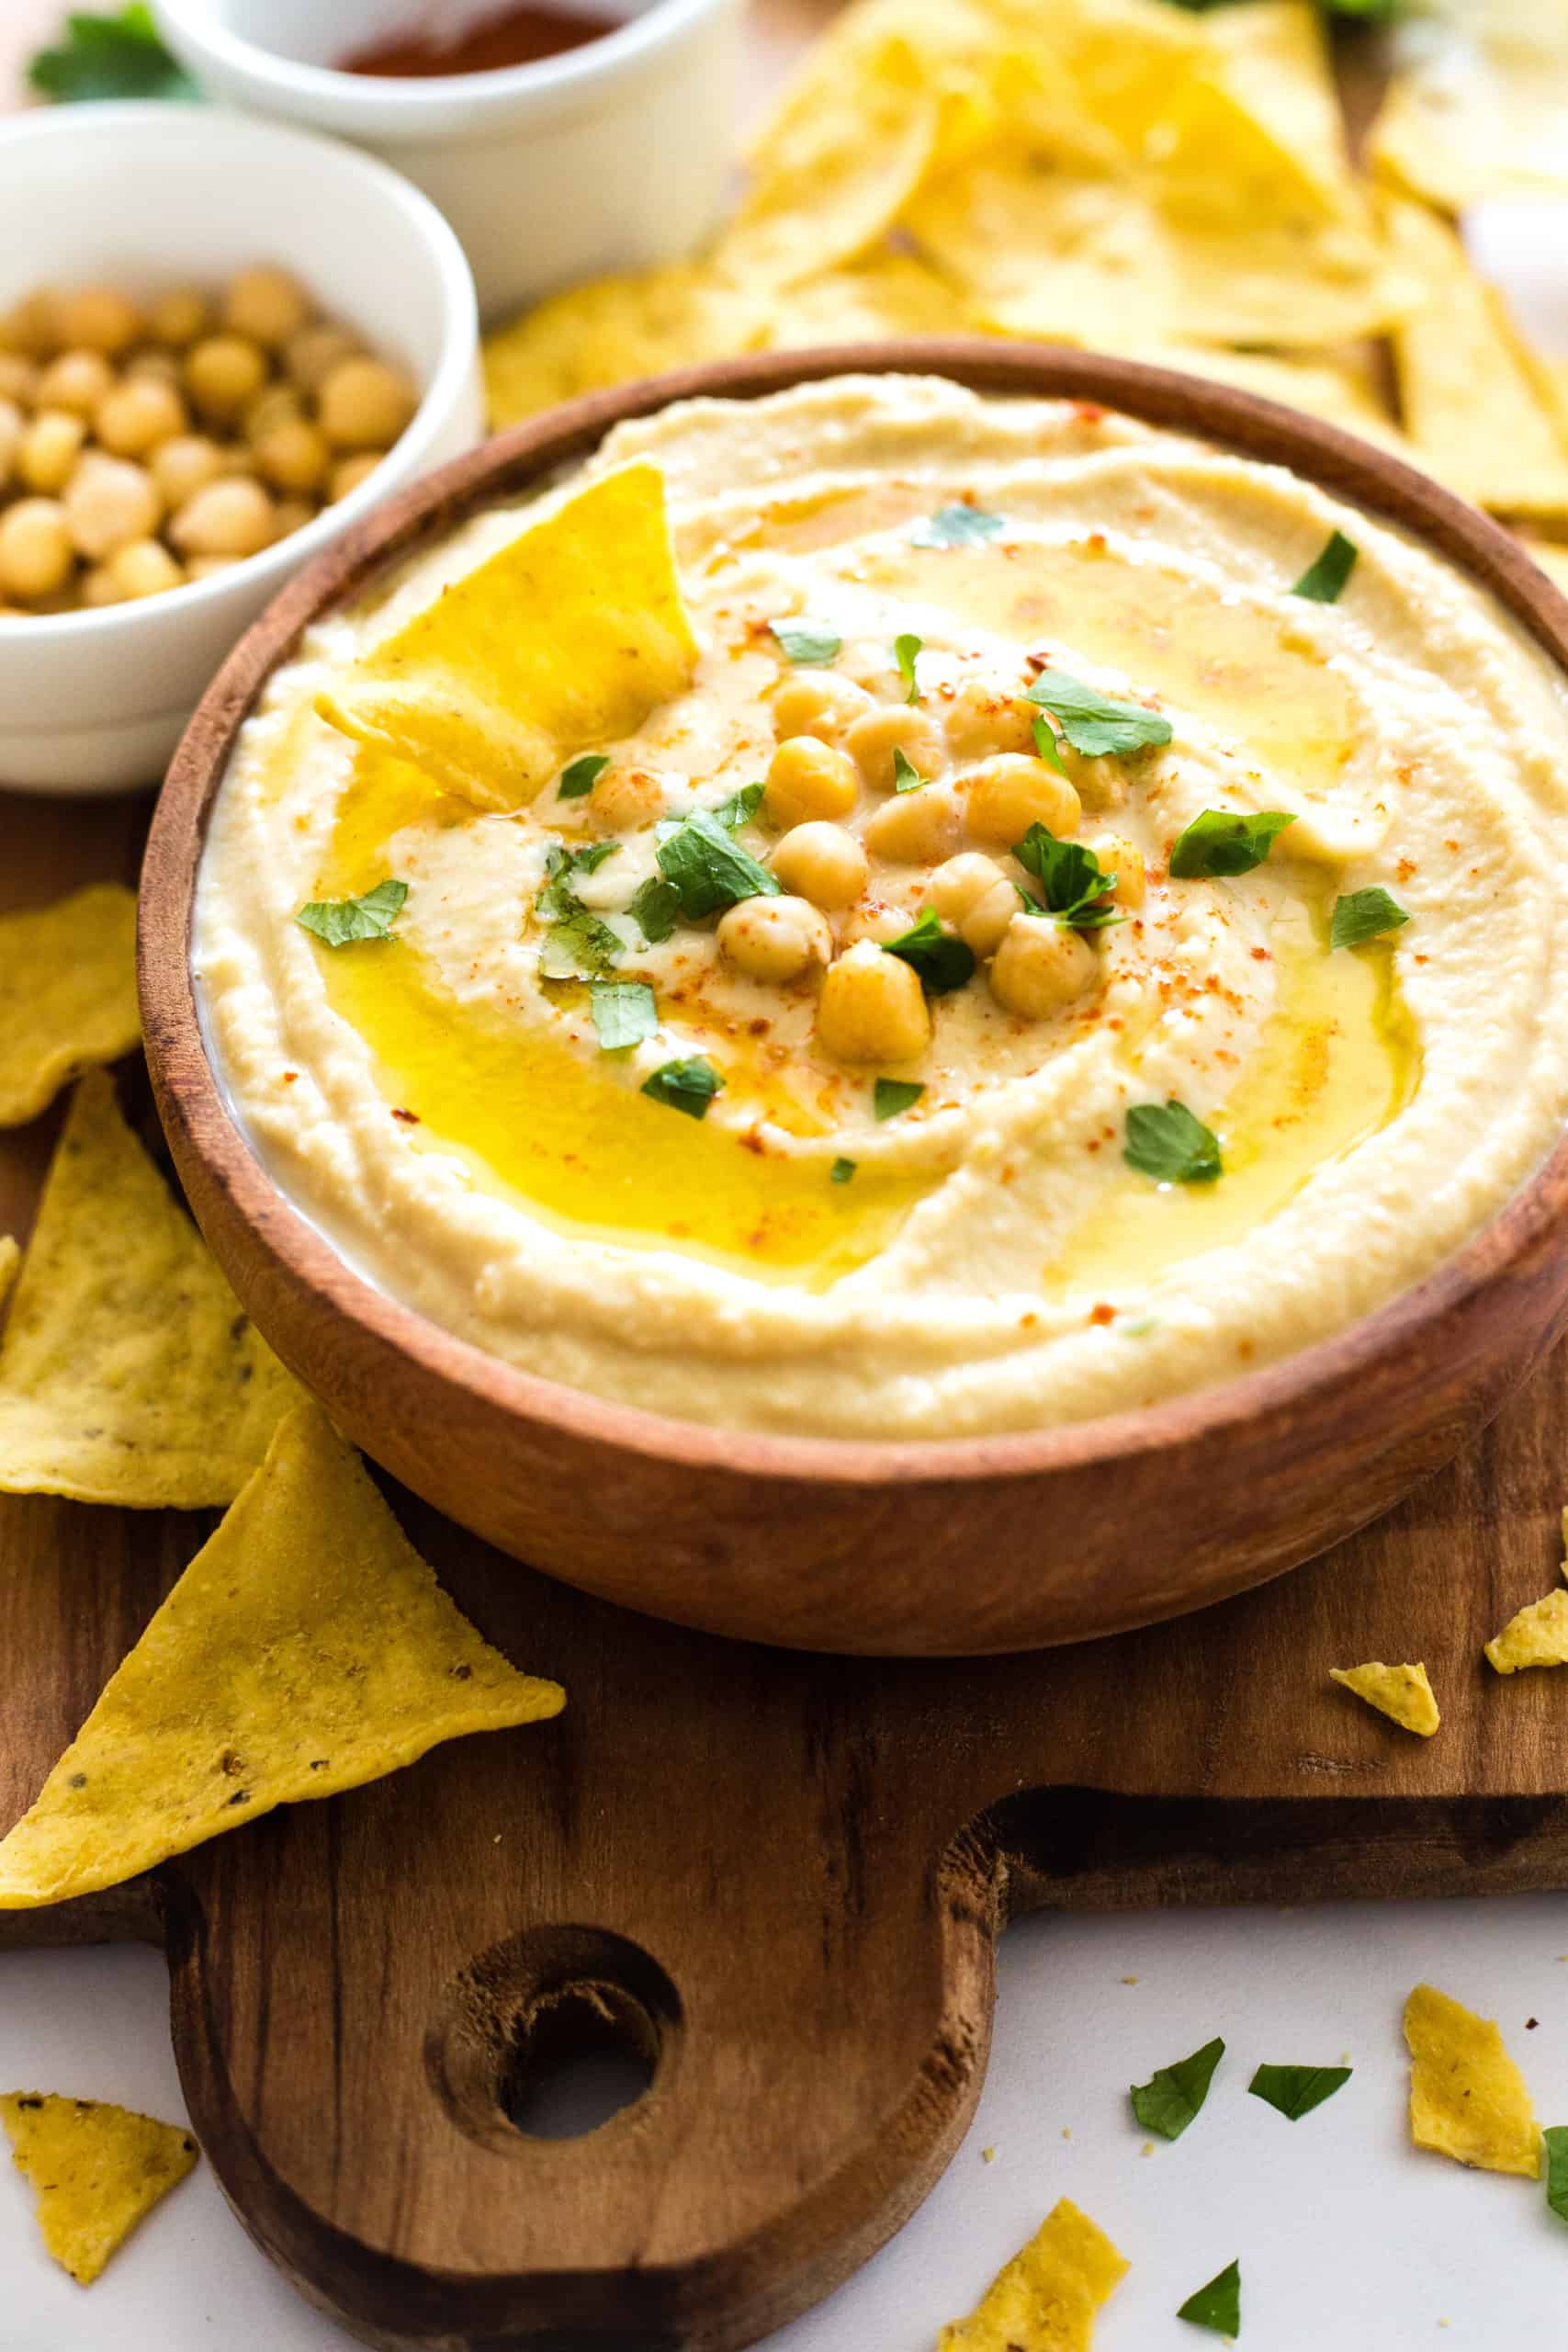 A bowl of creamy hummus and tortilla chips on a wooden board.